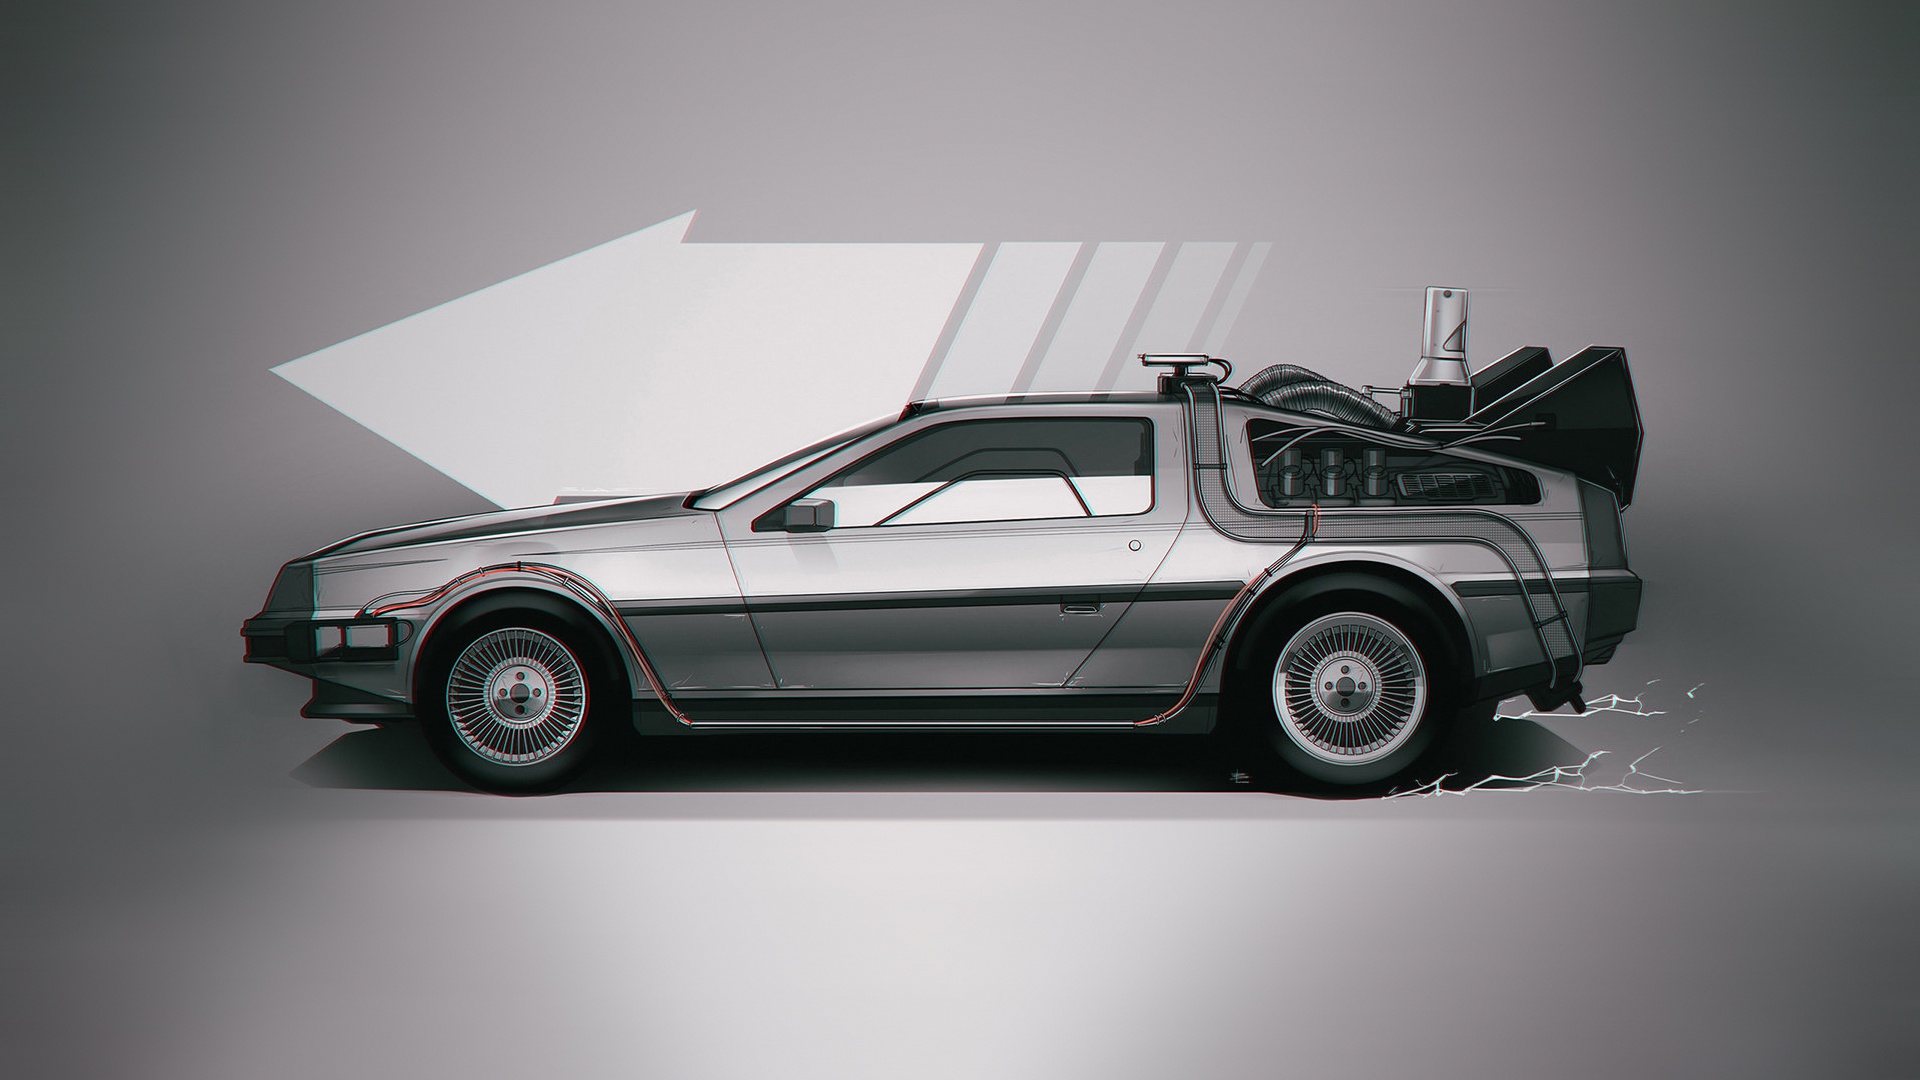 General 1920x1080 car Time Machine artwork movies Back to the Future DeLorean vehicle side view